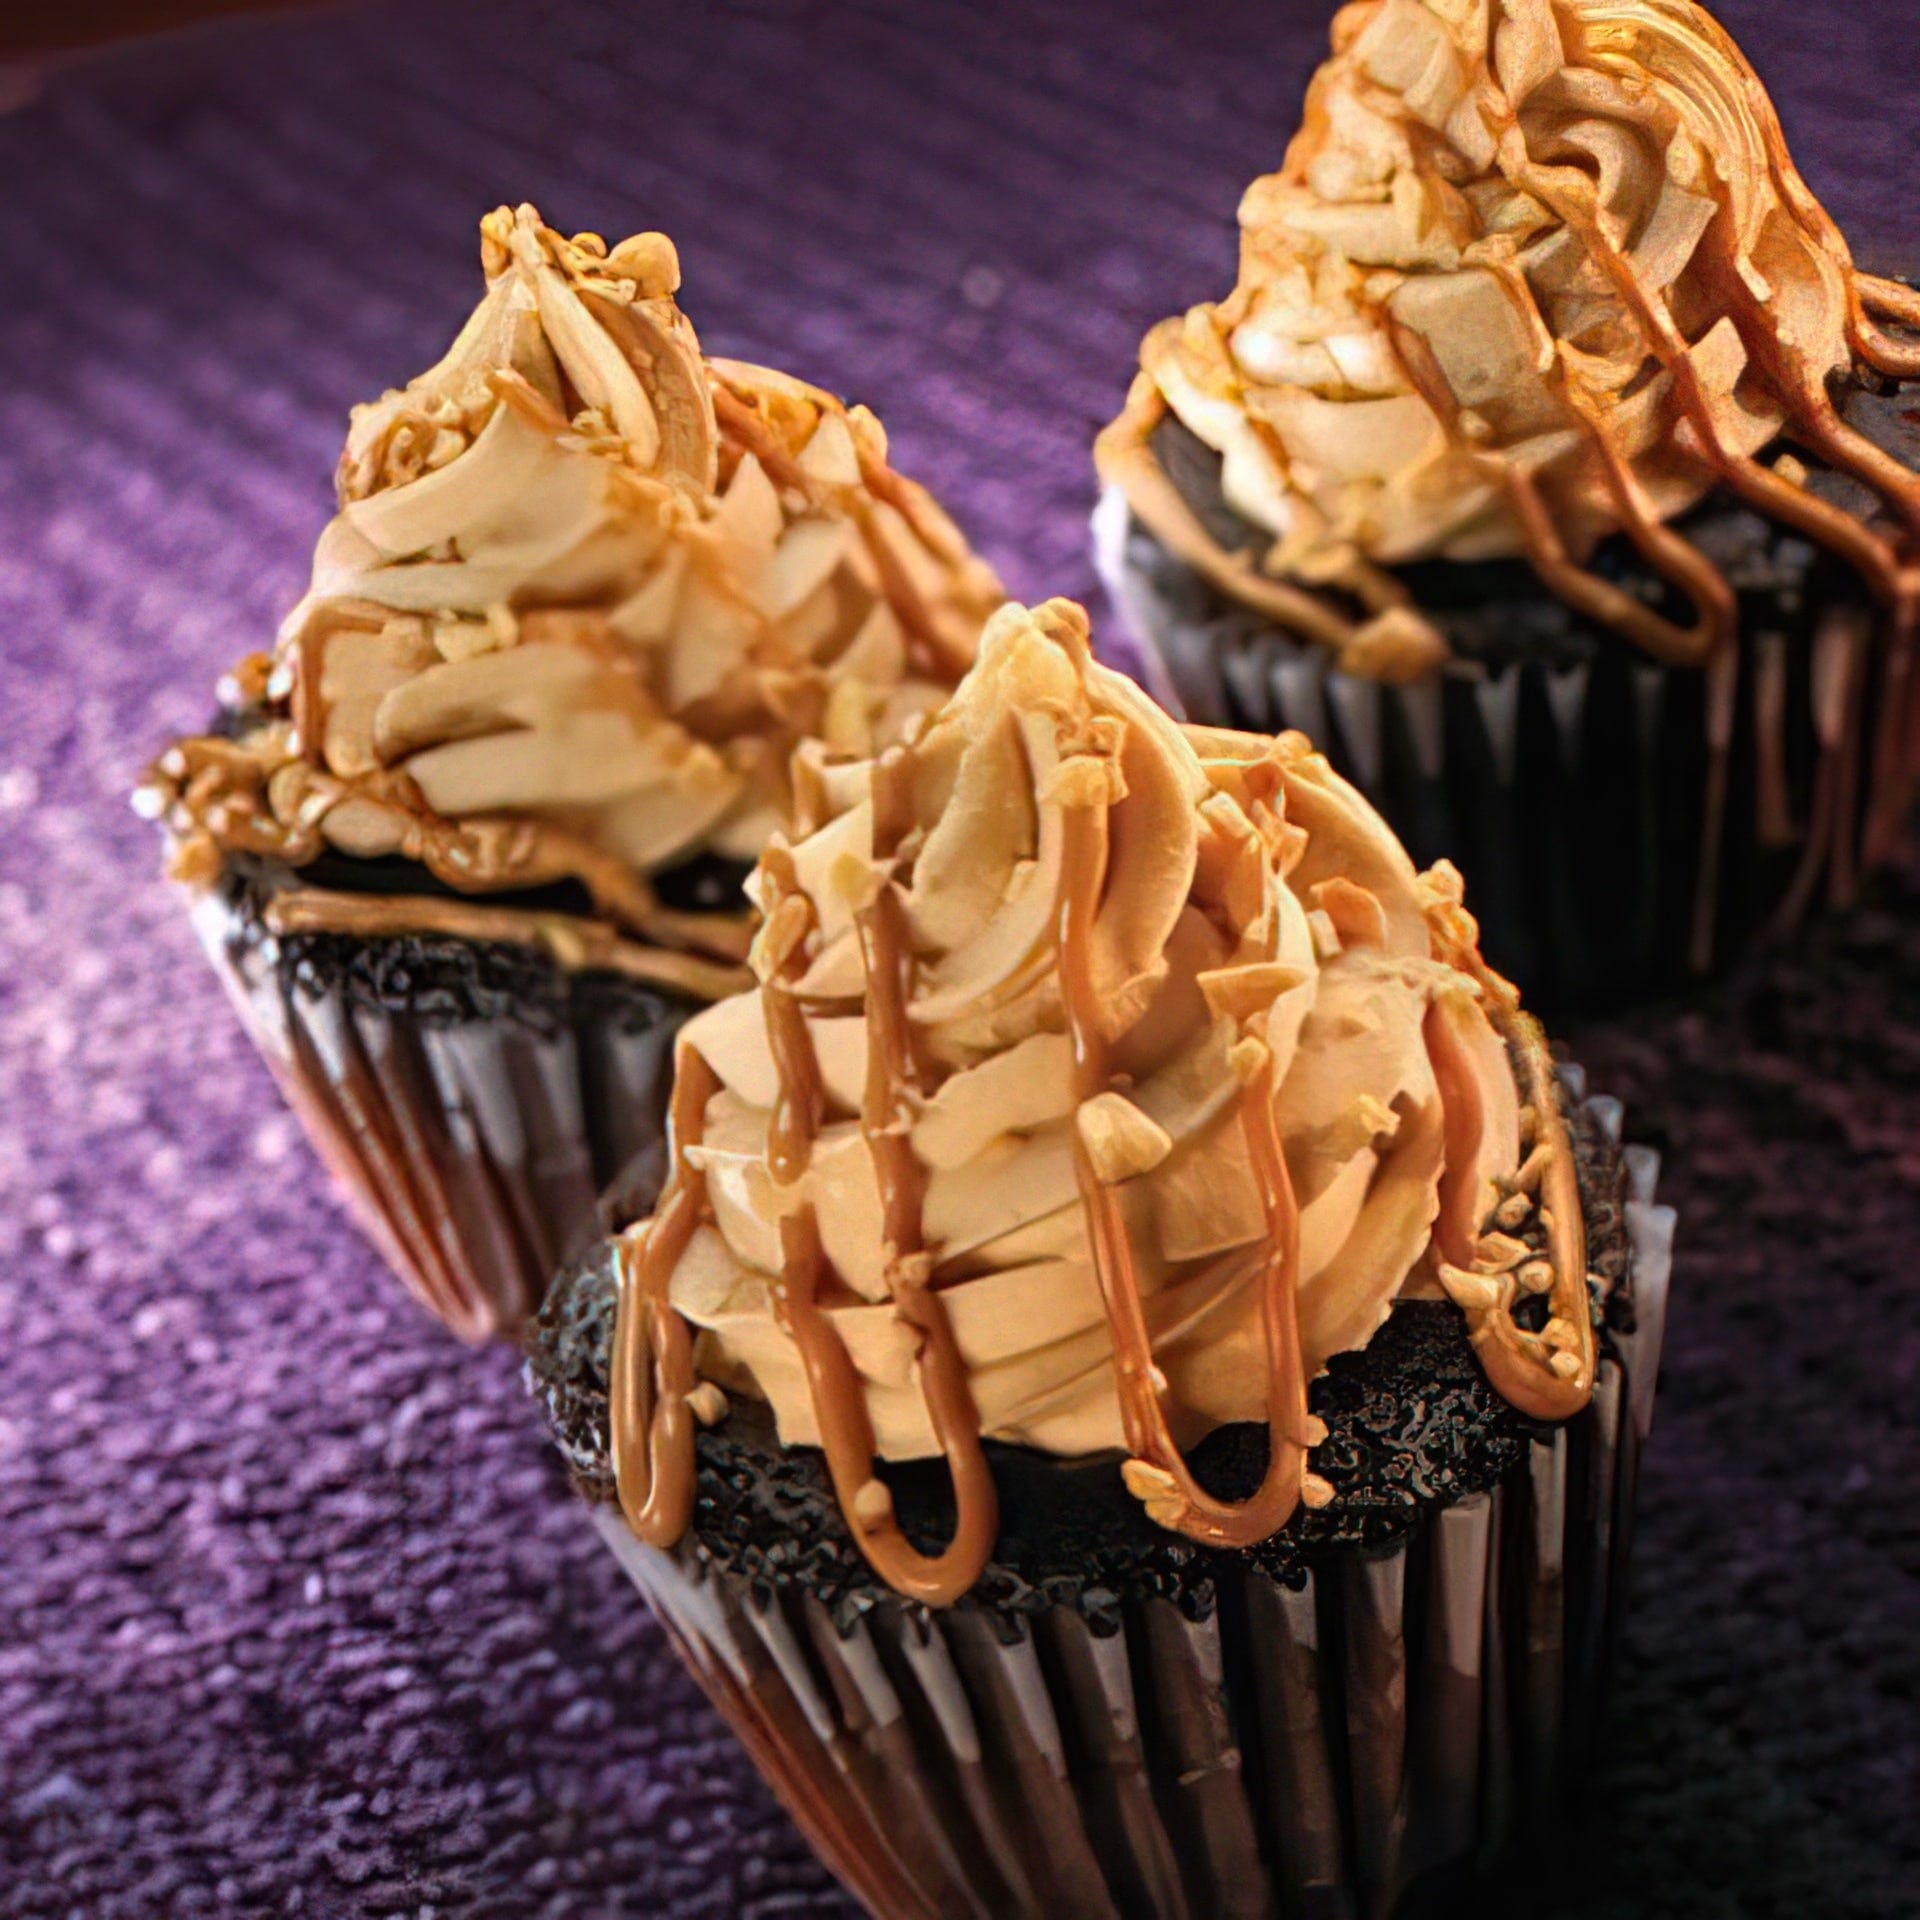 Peanut Butter Topped Jumbo Cupcakes